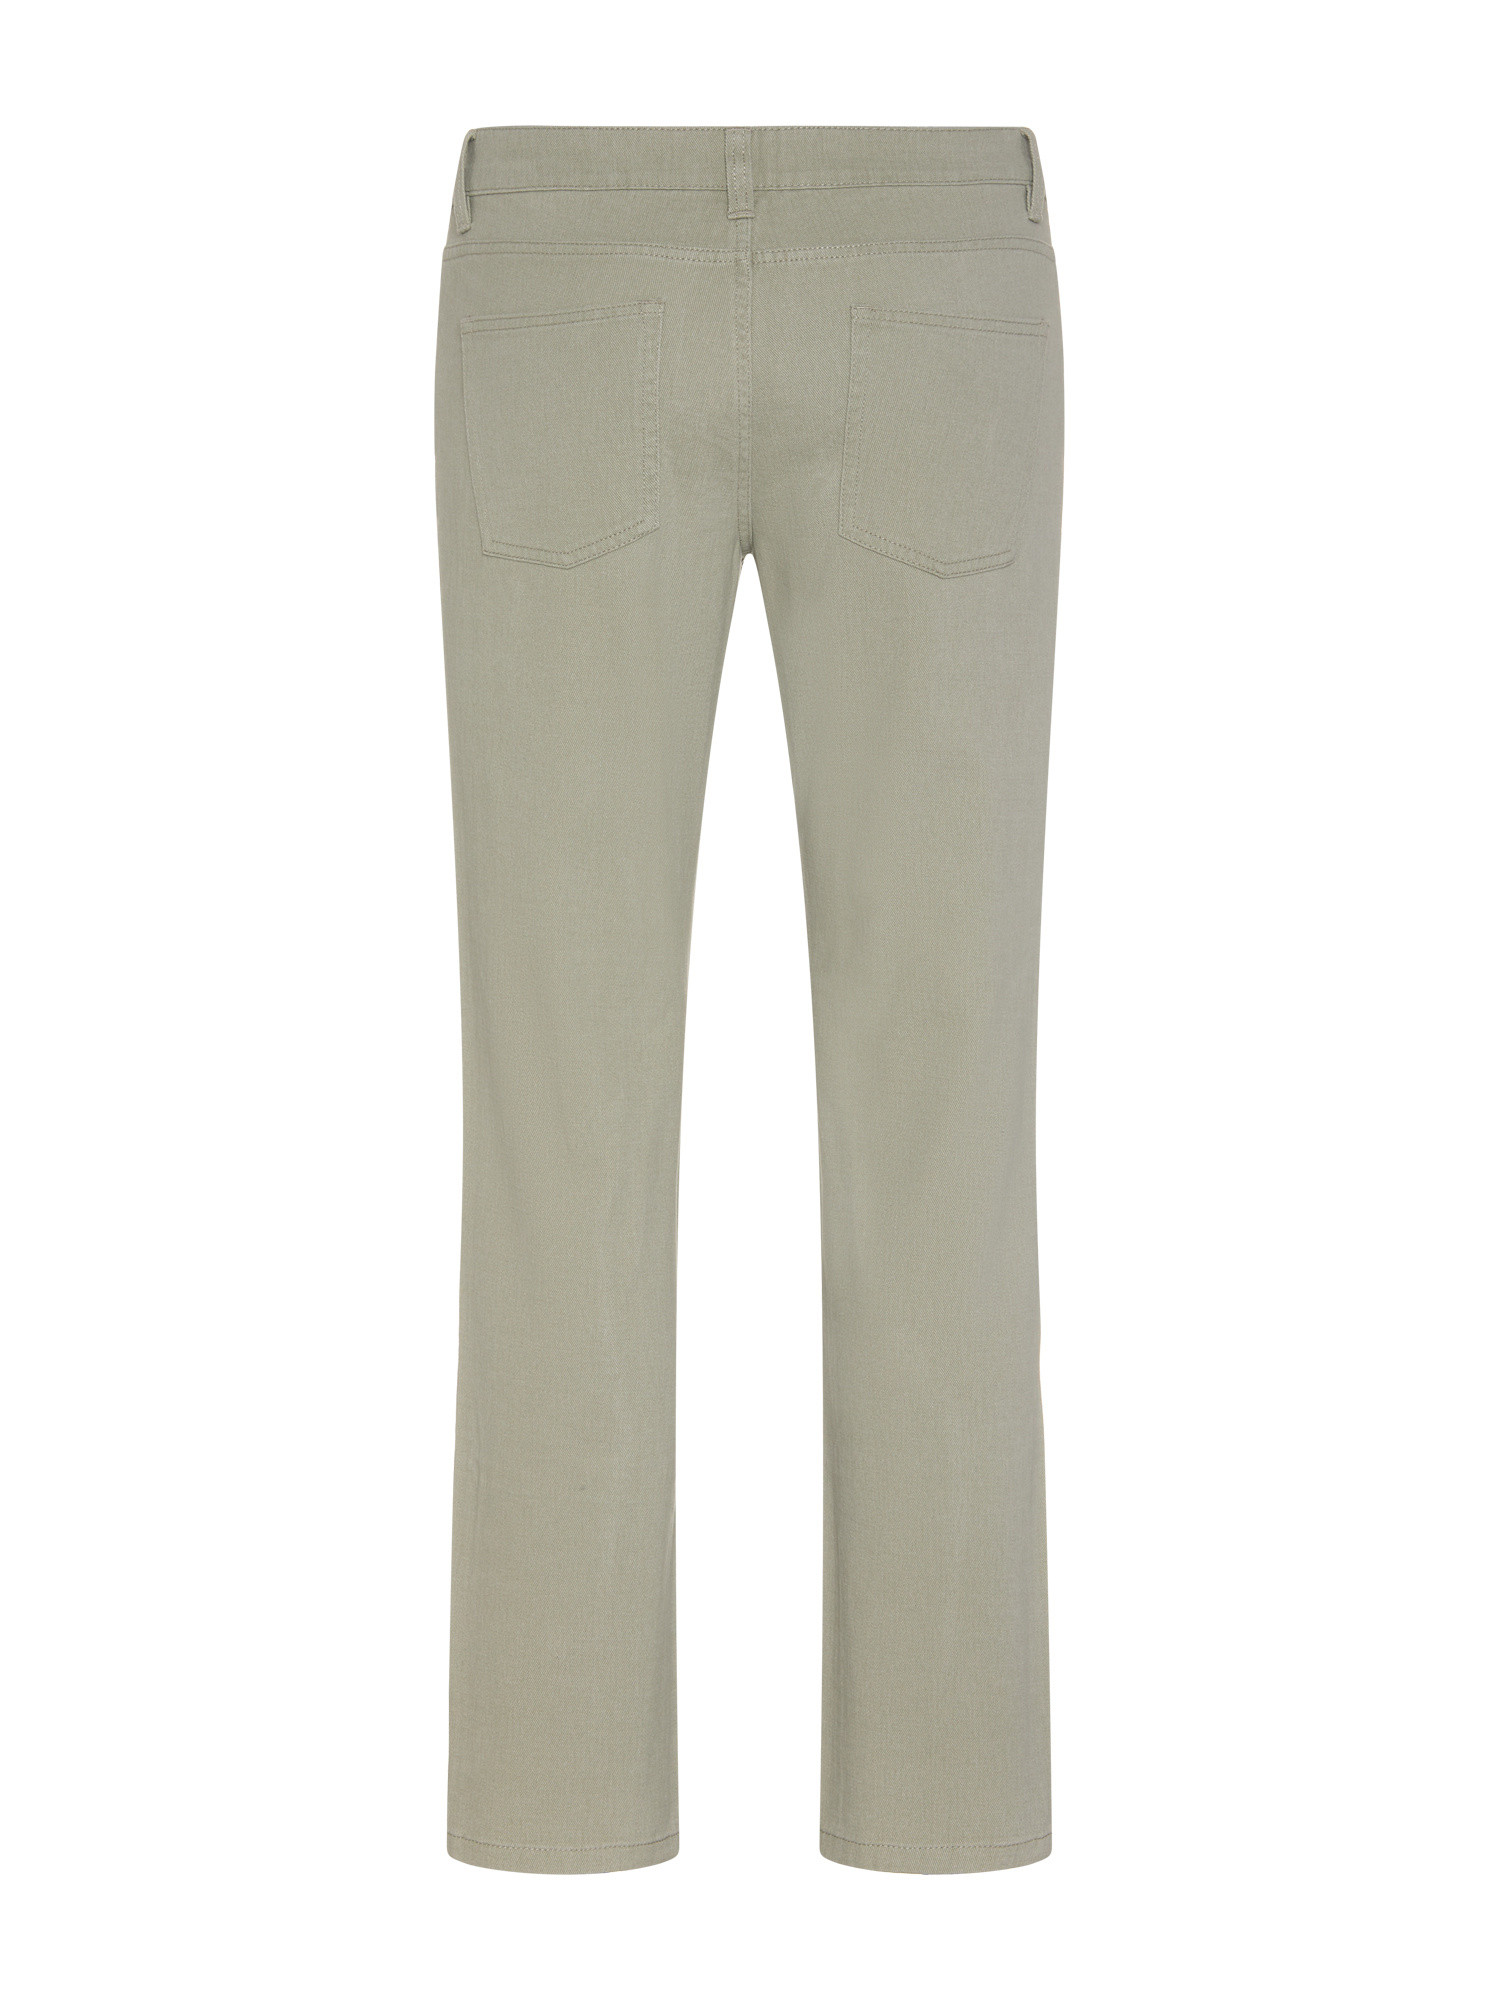 JCT - Regular fit five pocket trousers in pure cotton, Sage Green, large image number 1